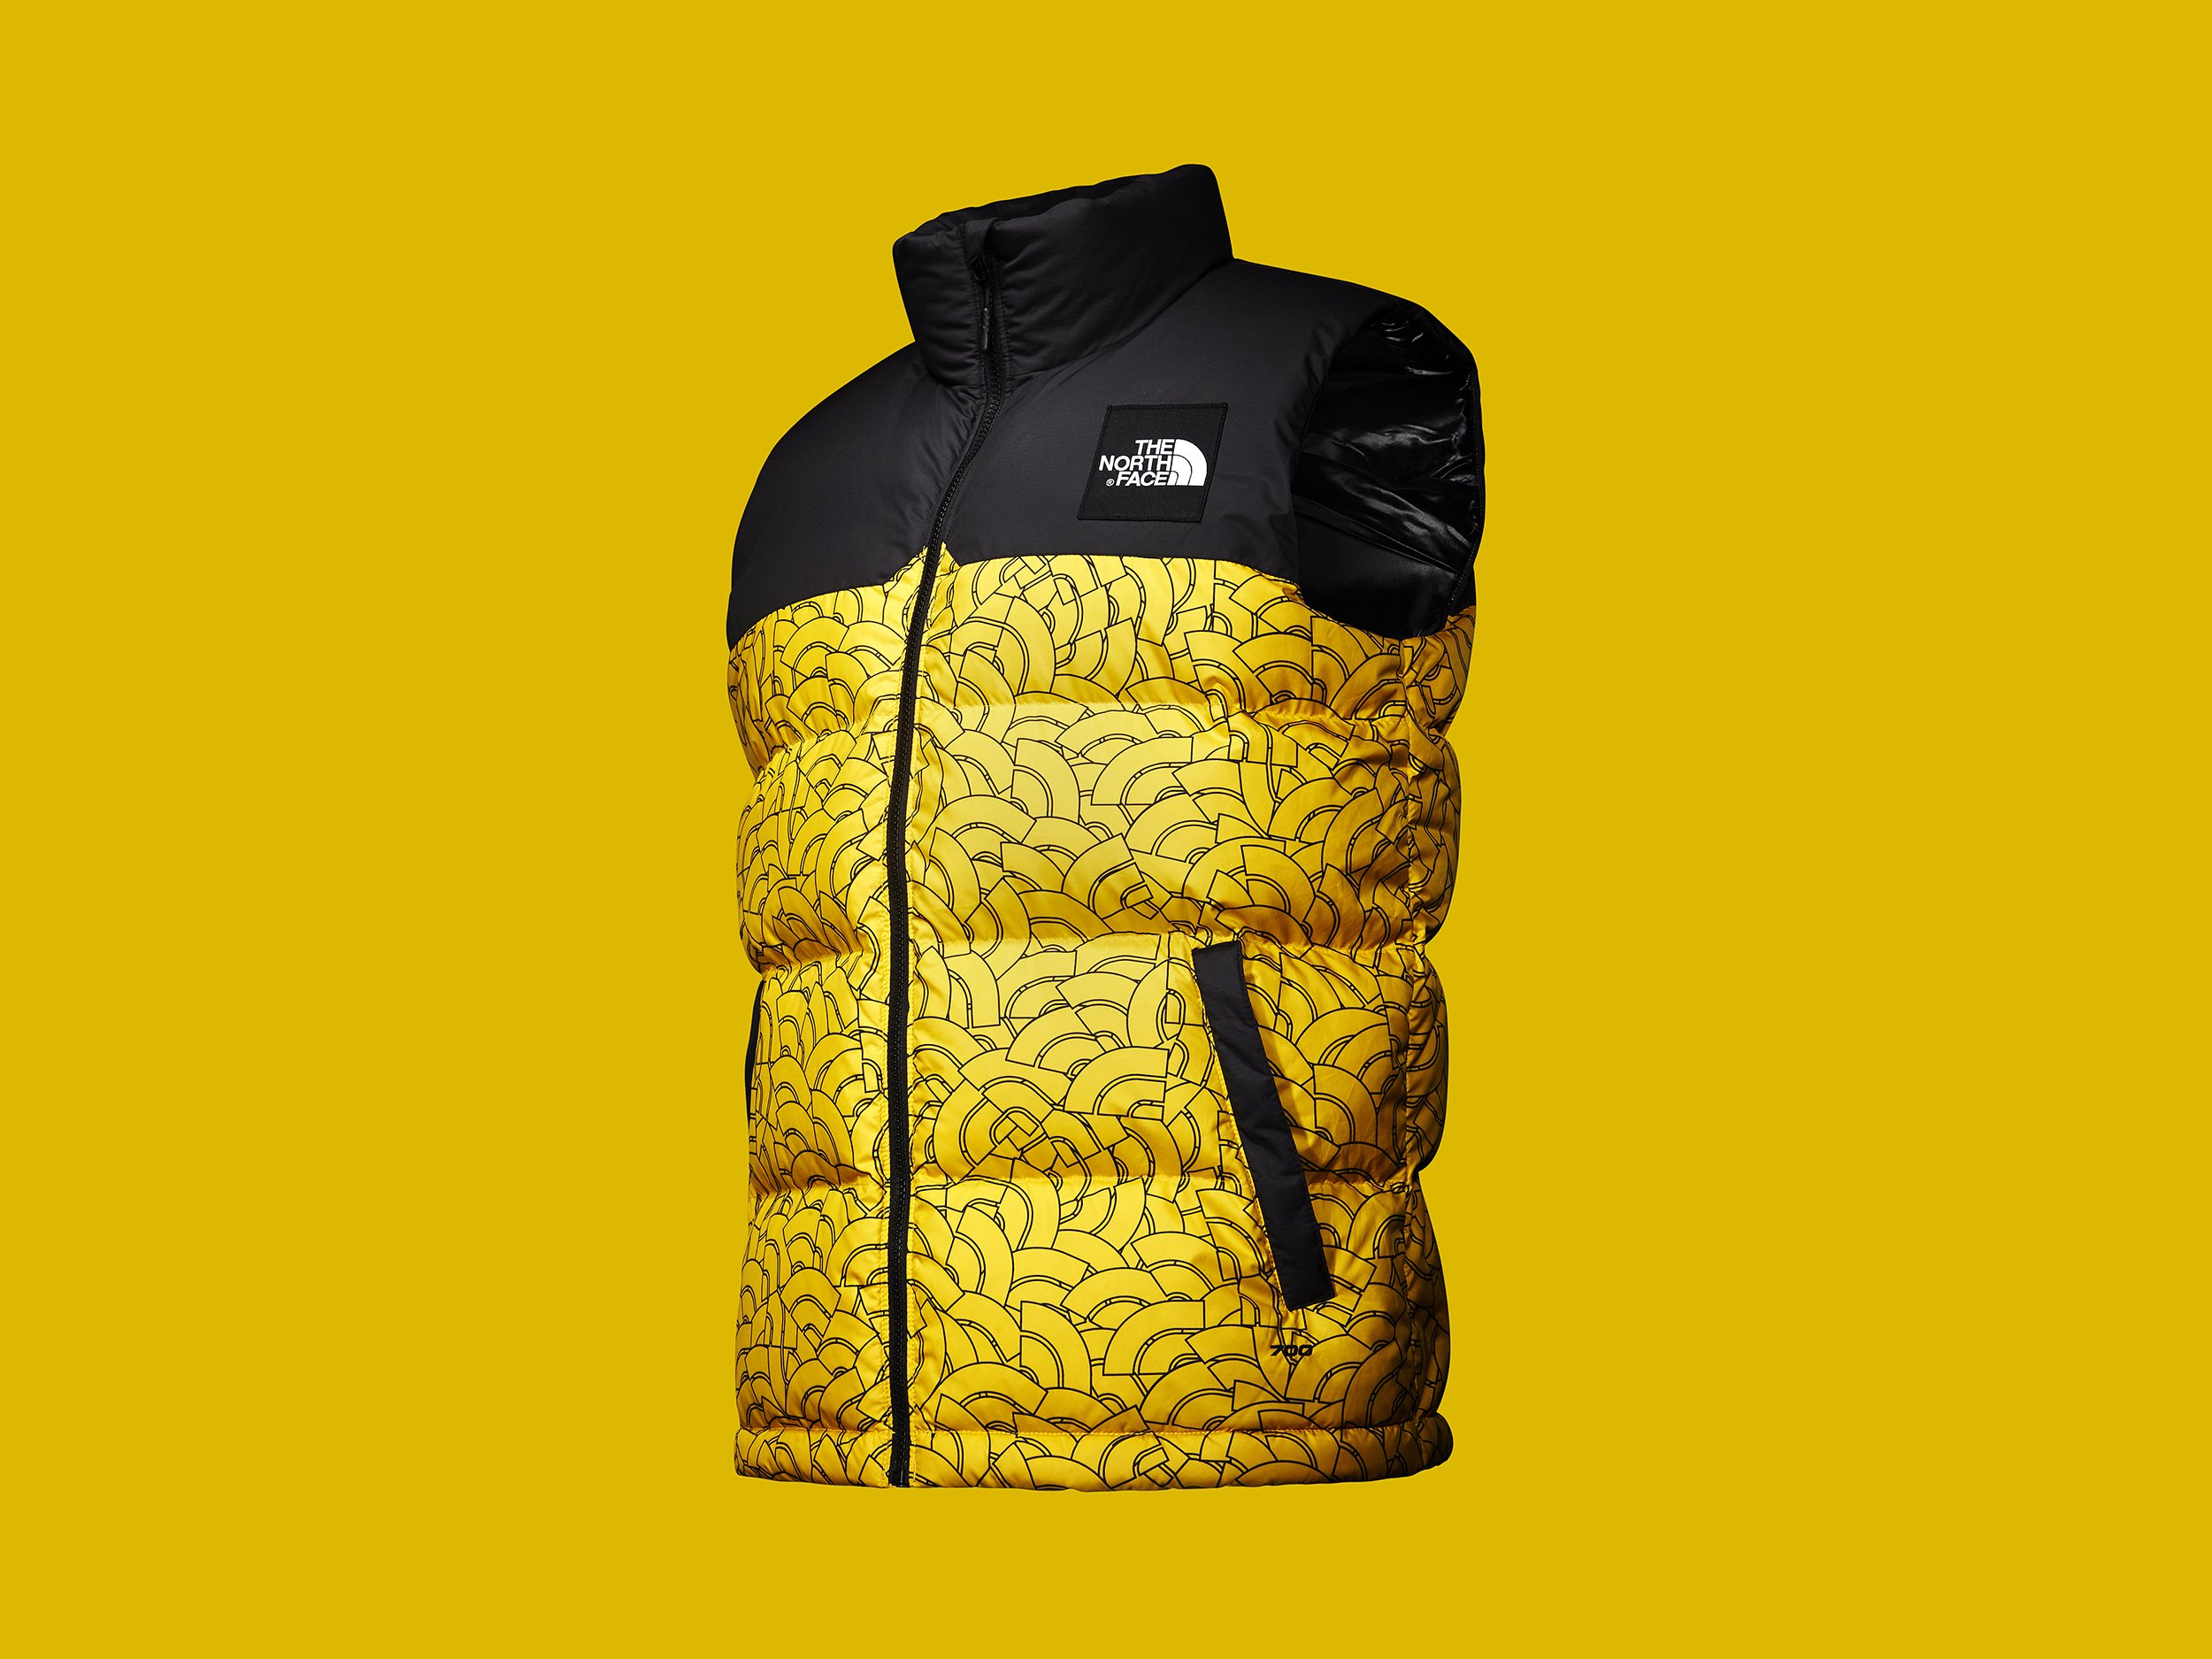 North Face Nupste Yellow Jacket shot by still life photographer Simon Lyle Ritchie